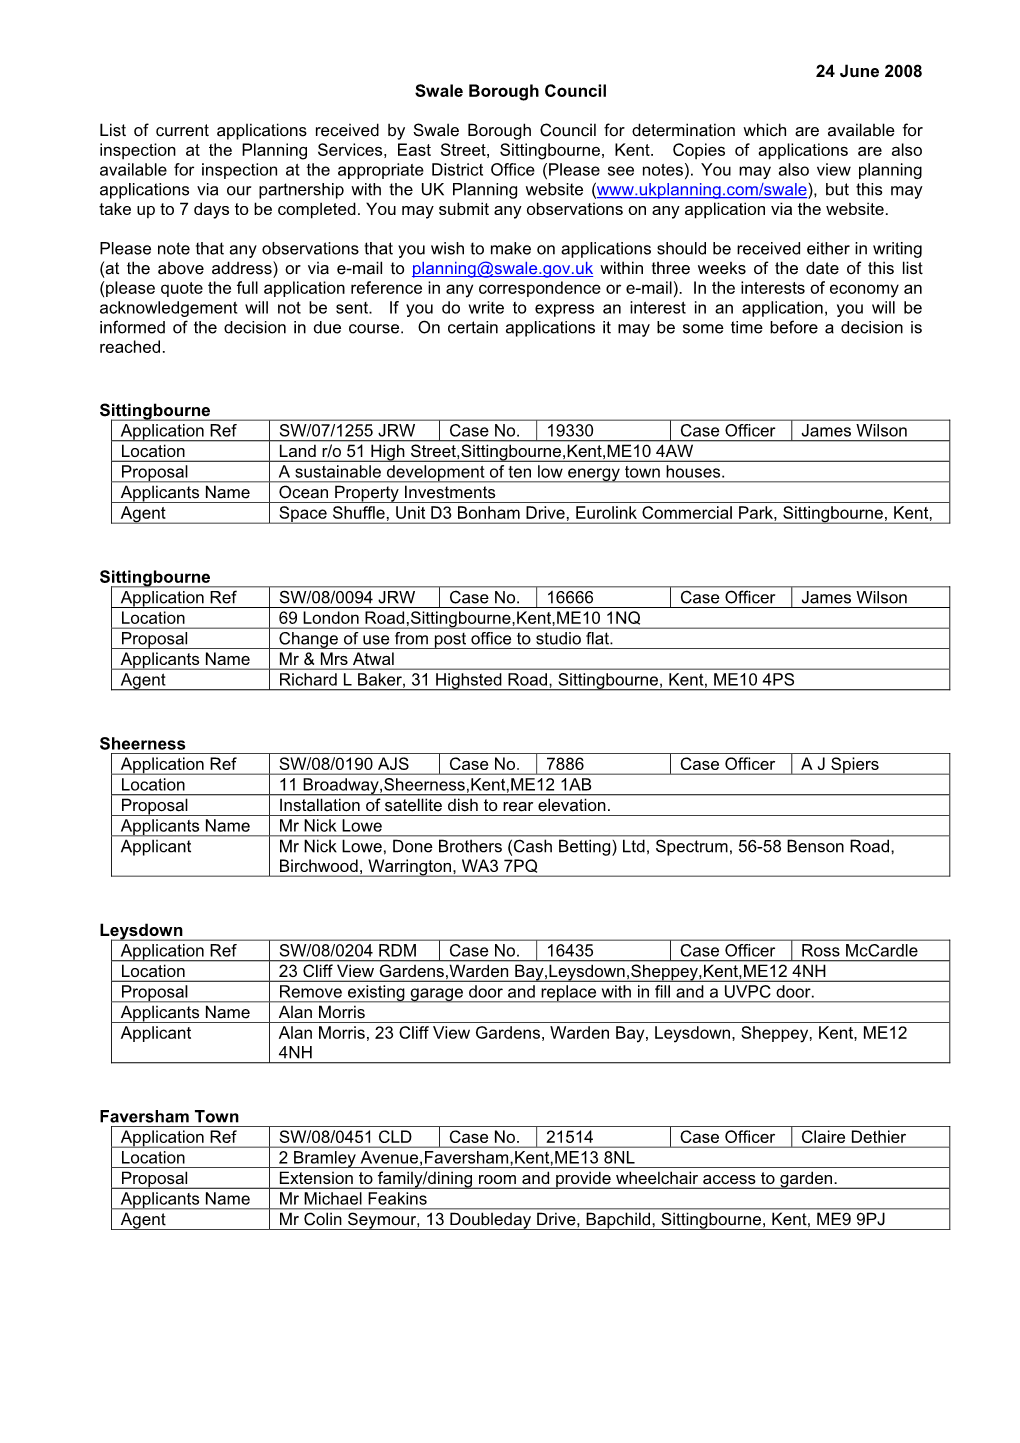 24 June 2008 Swale Borough Council List of Current Applications Received